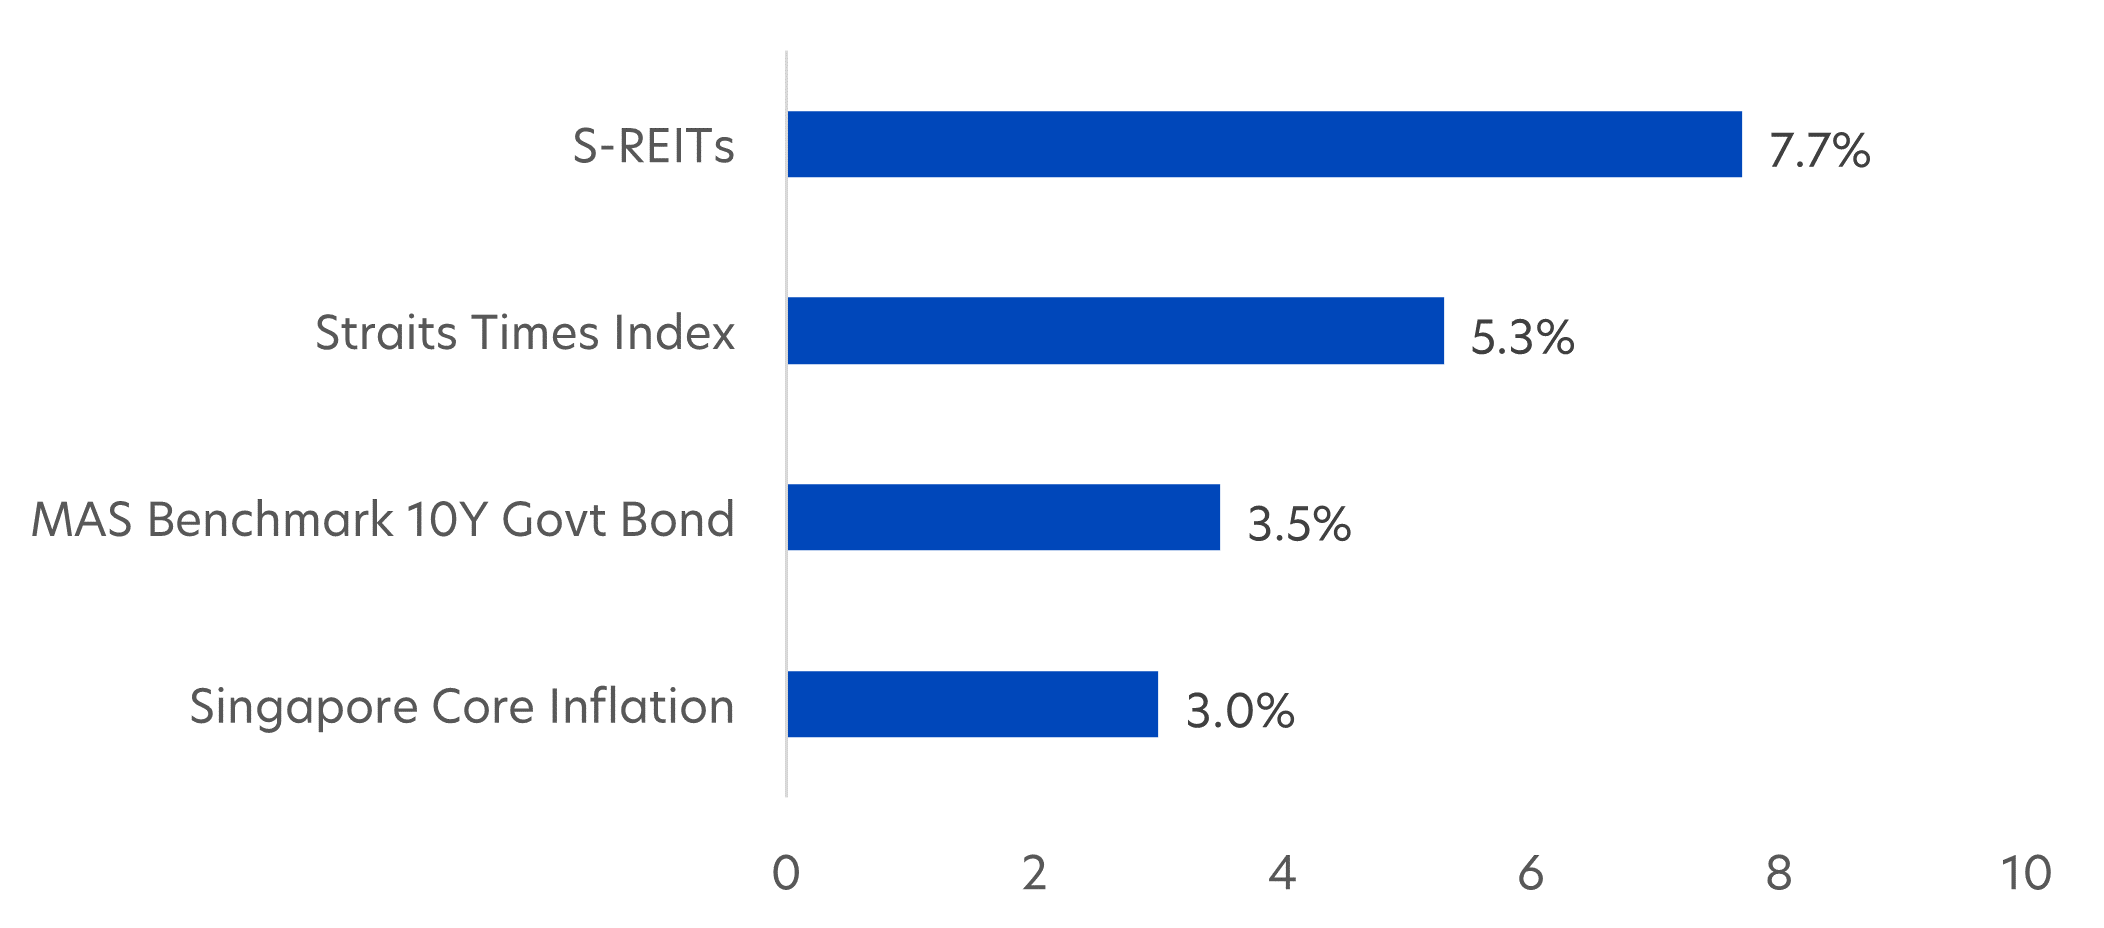 Fig 2: S-REITs have higher yields compared to other asset classes